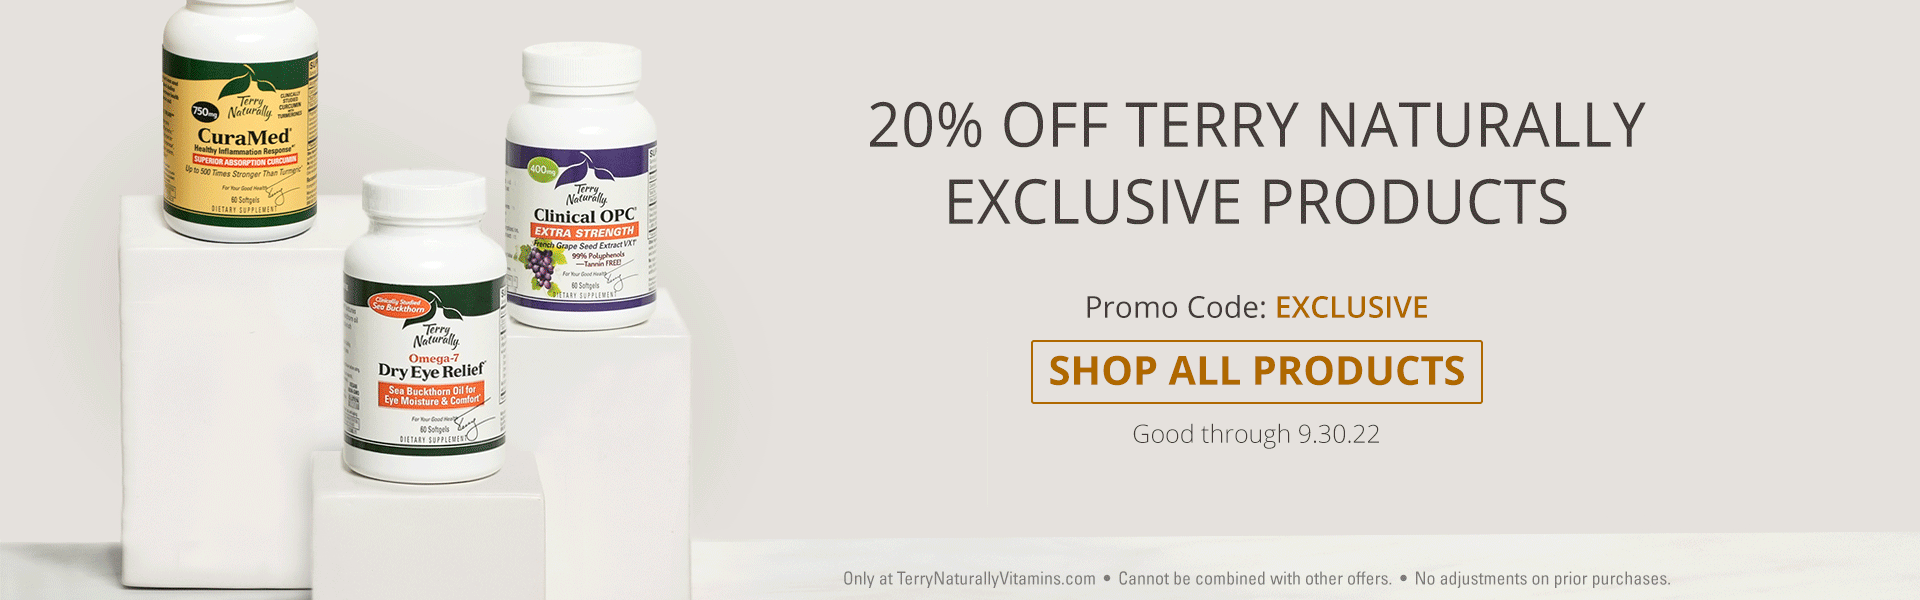 20% Off TERRY NATURALLY EXCLUSIVE PRODUCTS